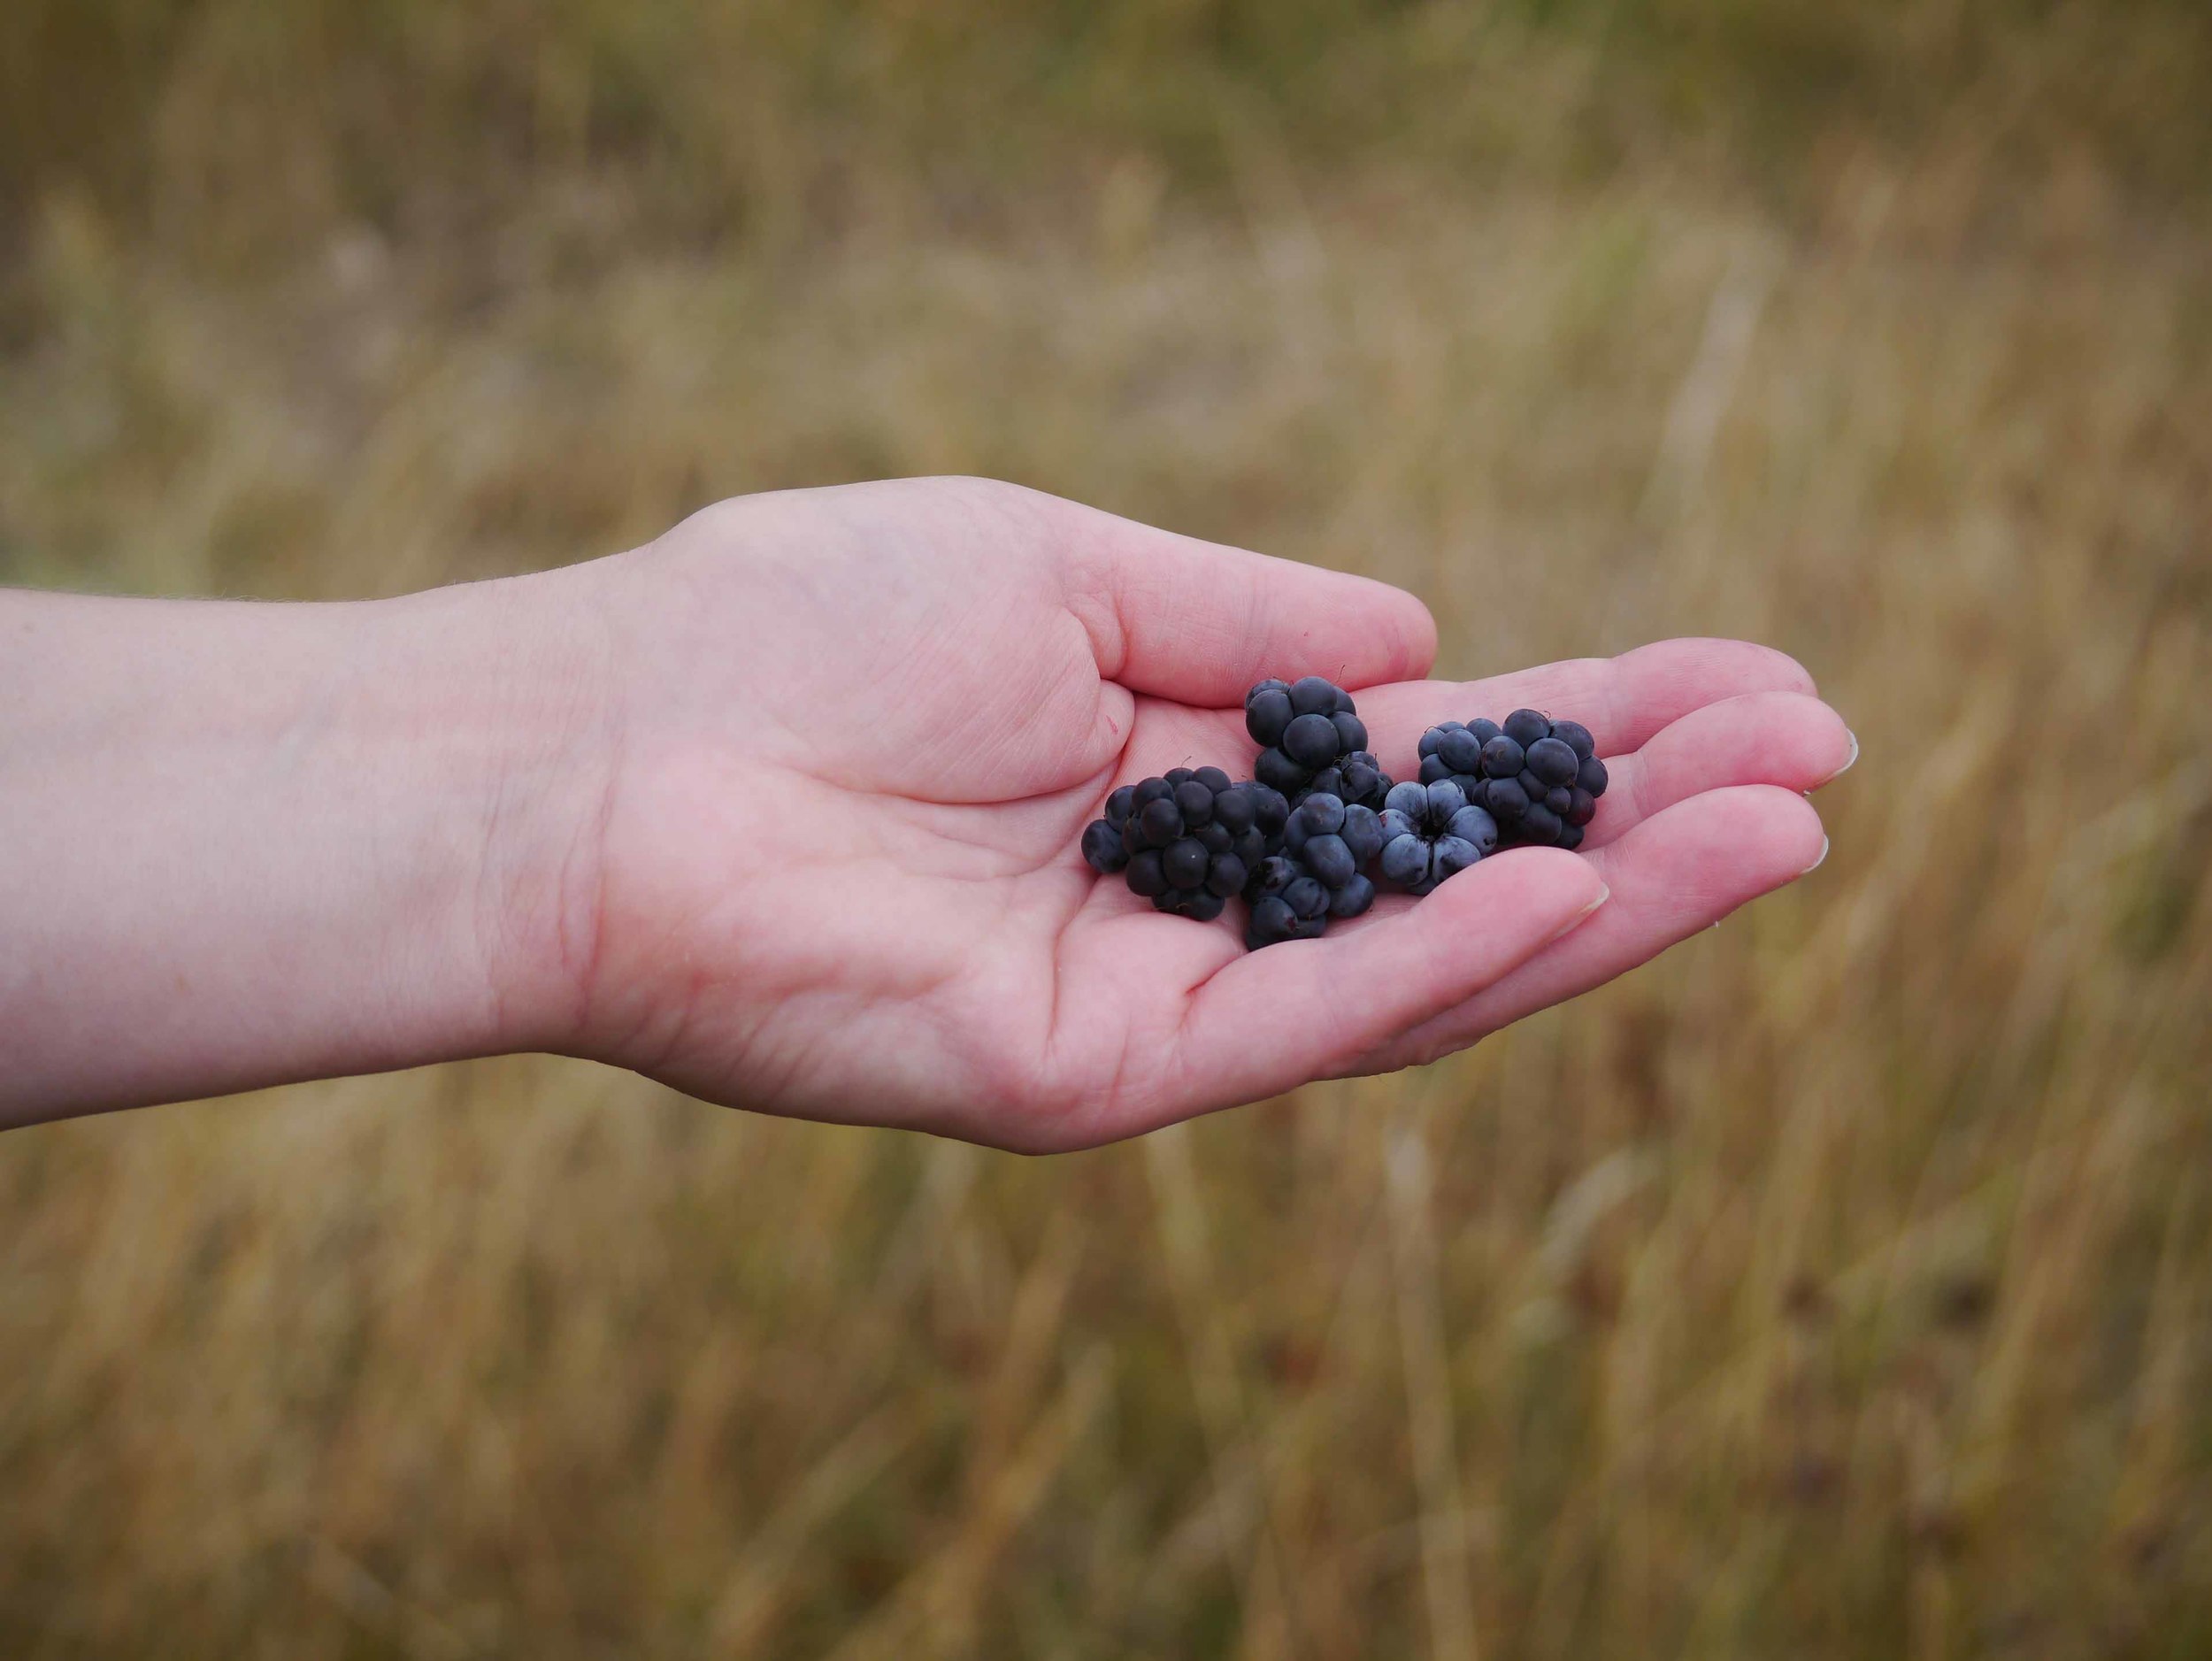 Bilberry picking at Theddlethorpe Nature Reserve